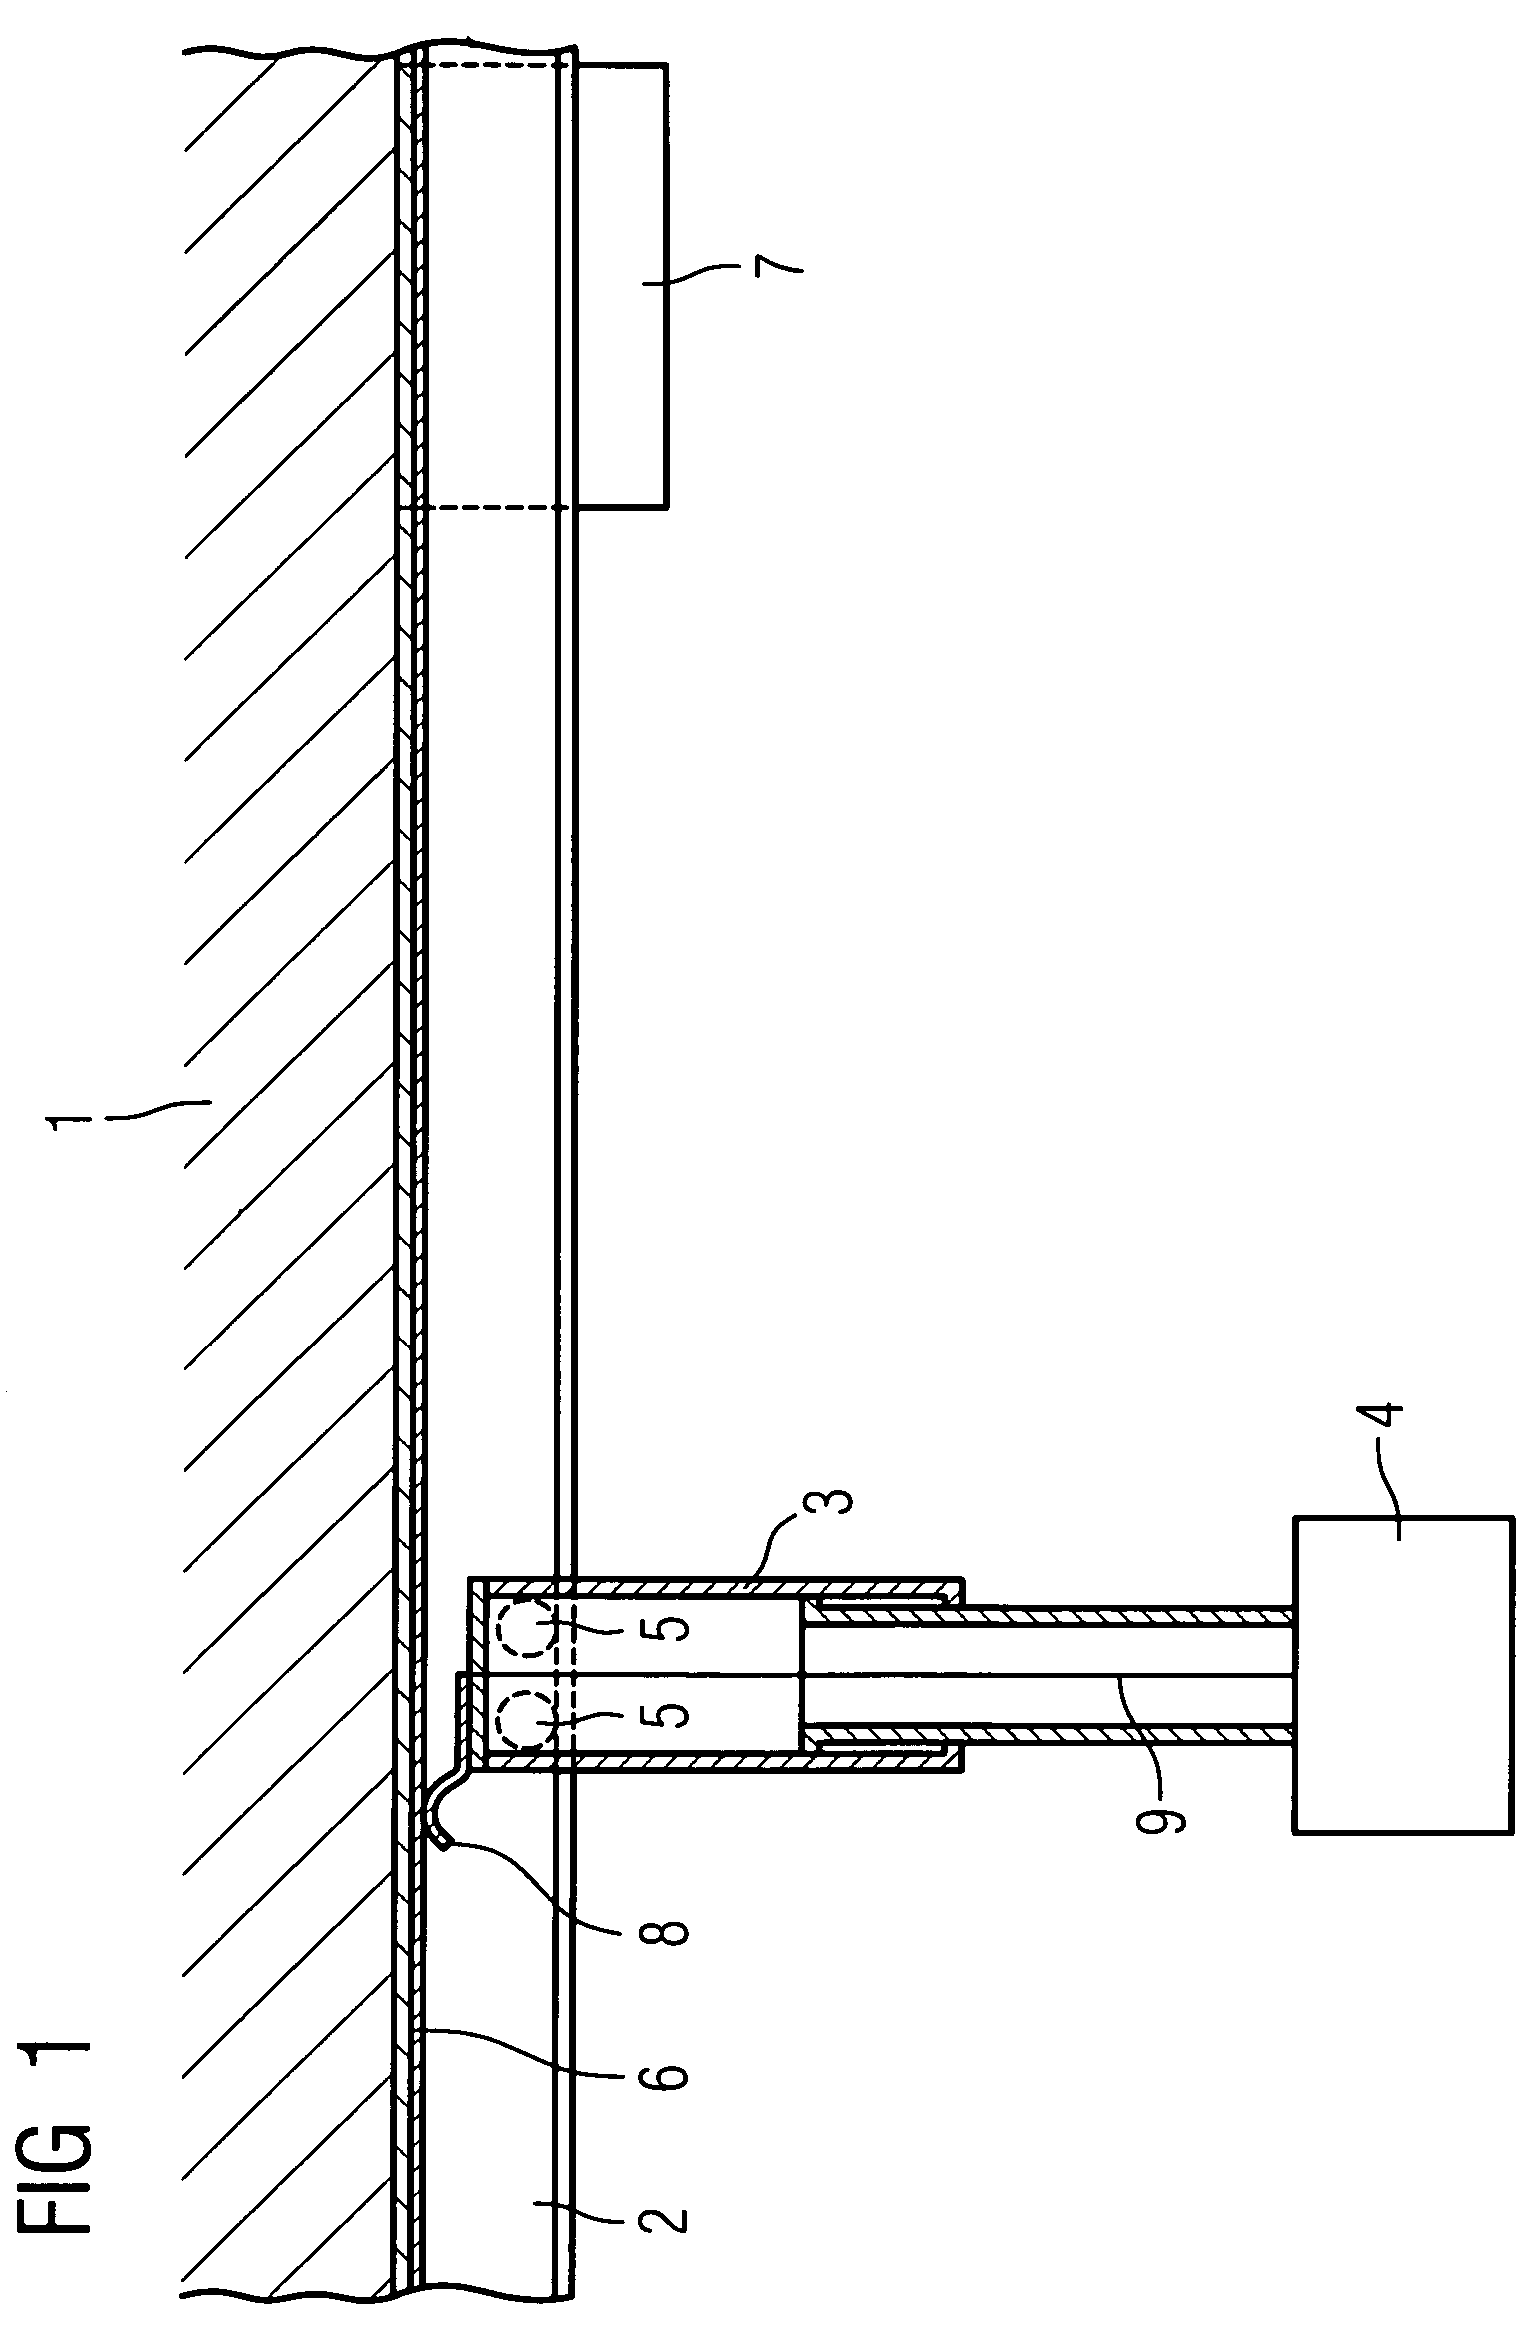 X-ray device with an x-ray source fixed to a ceiling stand